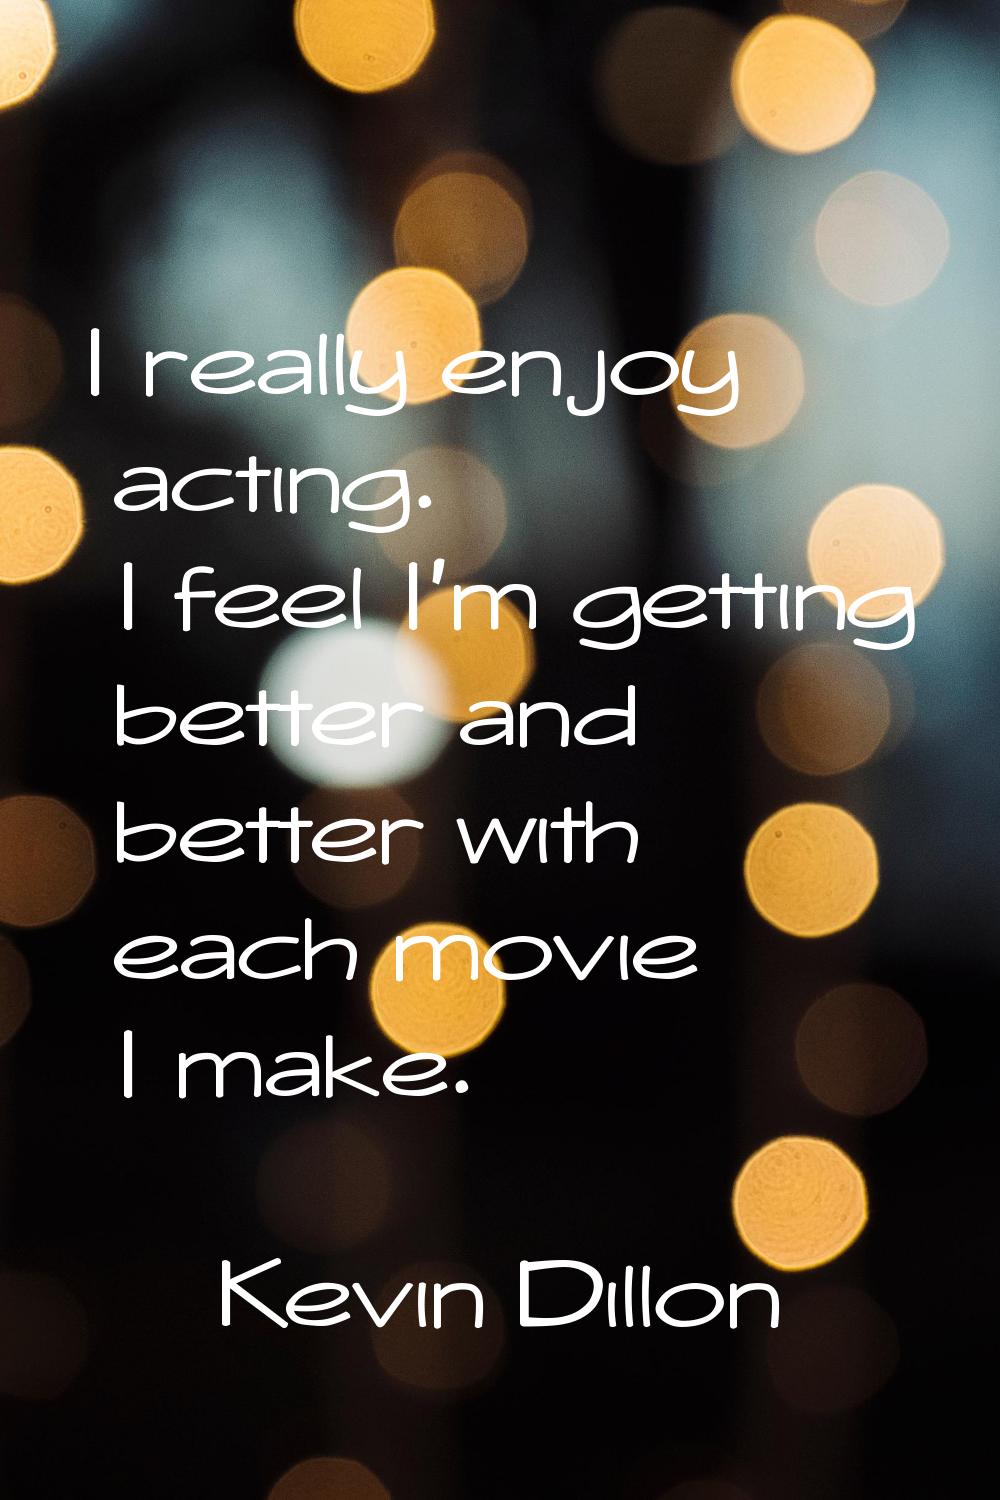 I really enjoy acting. I feel I'm getting better and better with each movie I make.